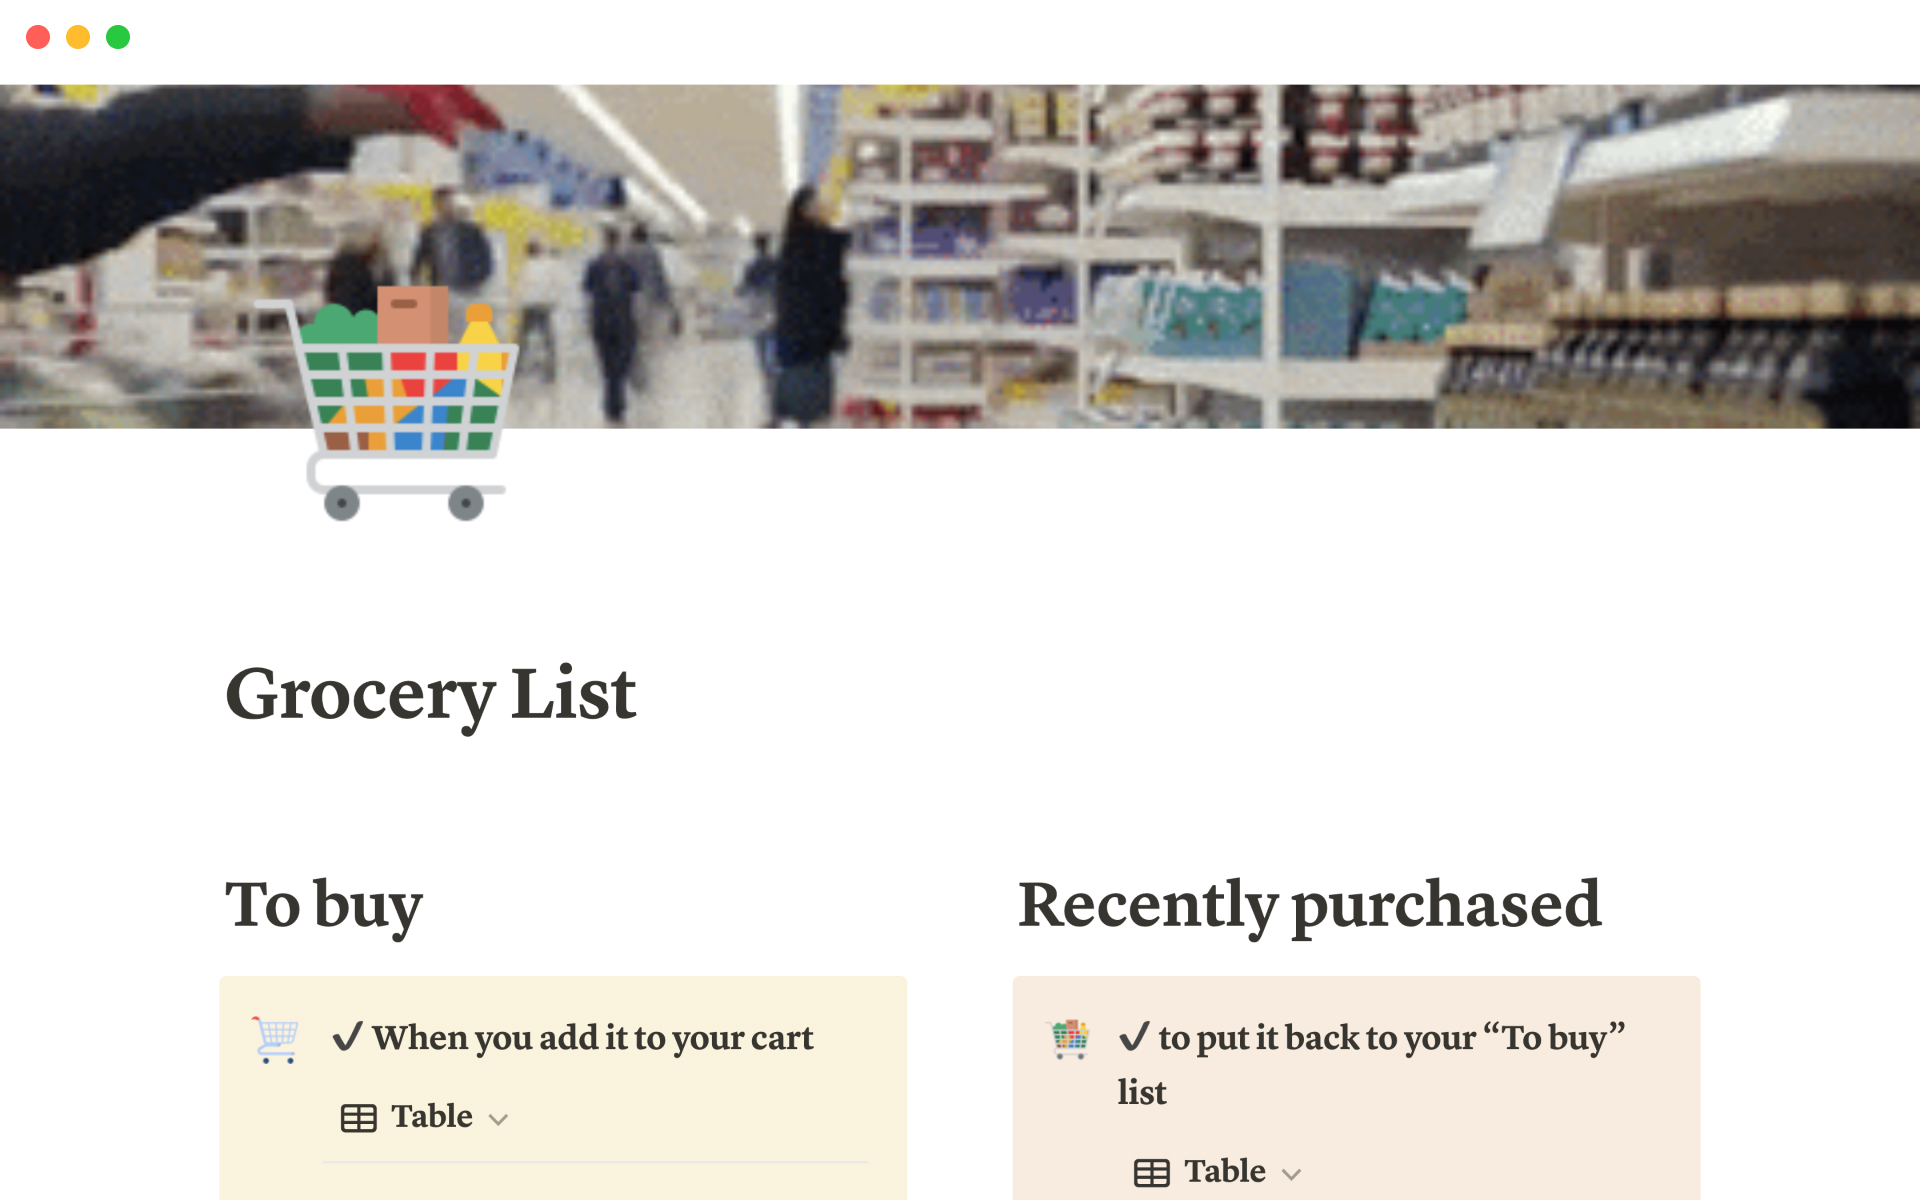 Quickly make a grocery list by checking off items you need to buy.